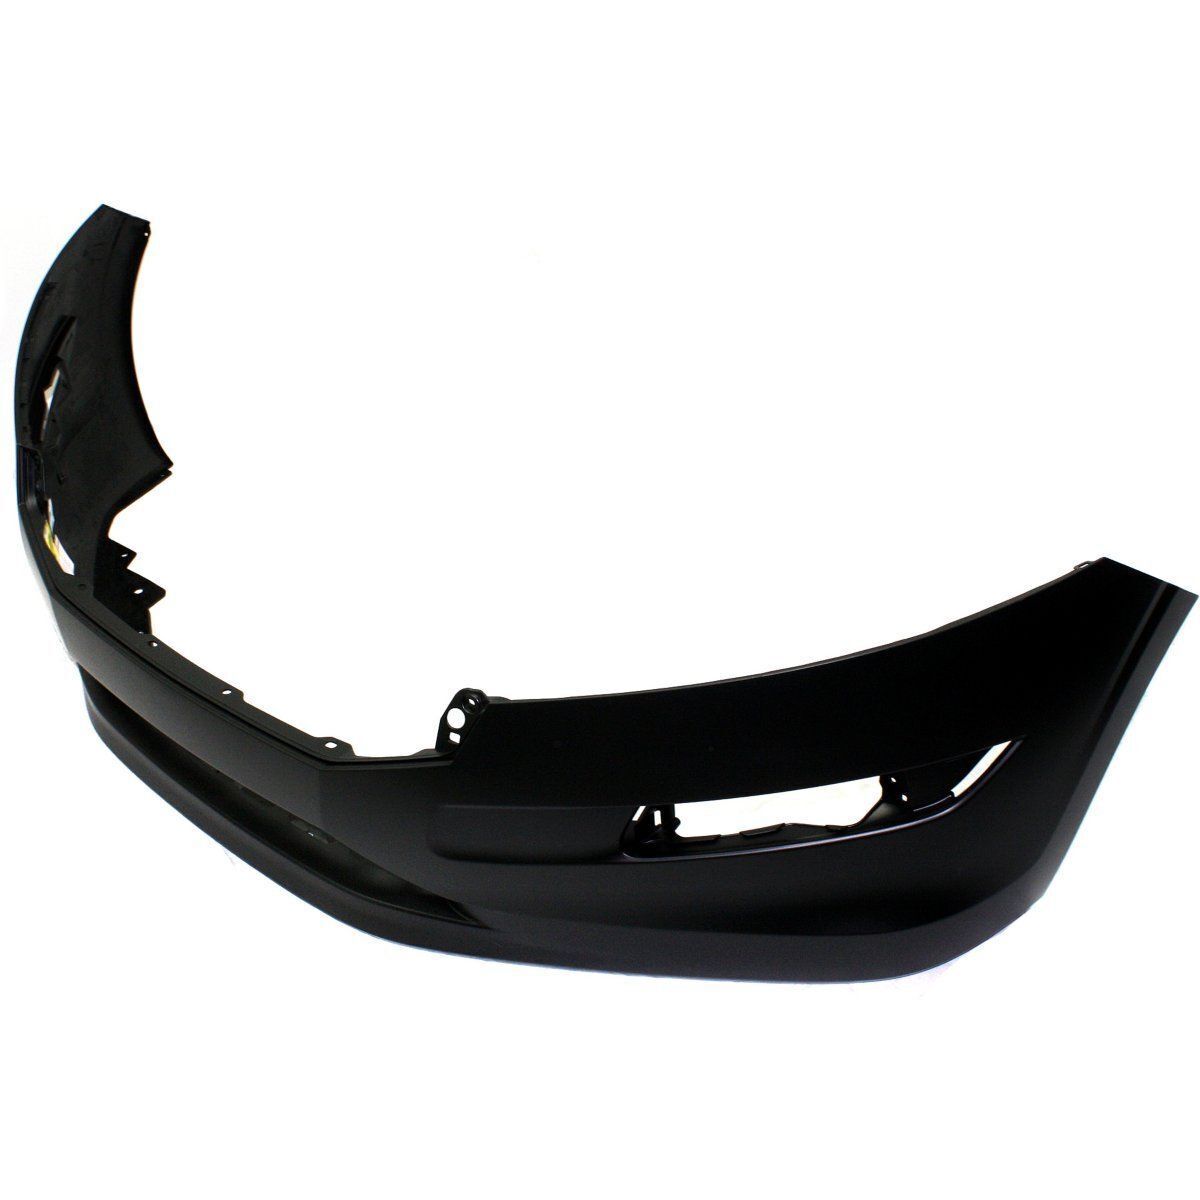 2010-2012 HONDA ACCORD Crosstour; Front Bumper Cover; Painted to Match